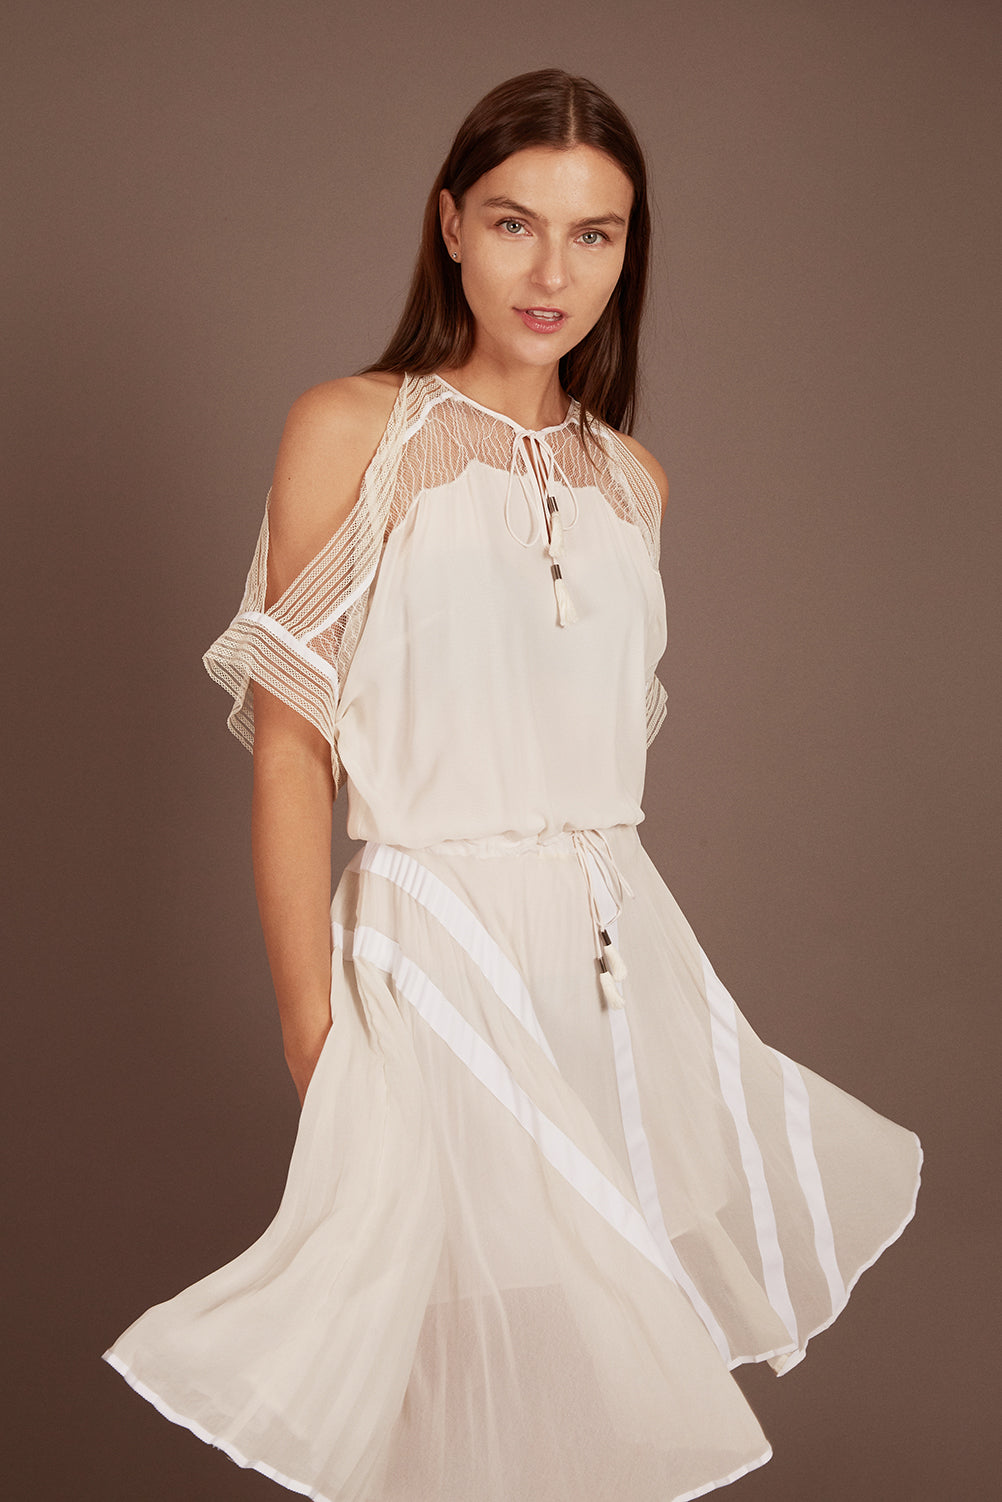 OHNE TITEL <br> S/S 2016 Ready to Wear Collection Cream Dress <br> Size S